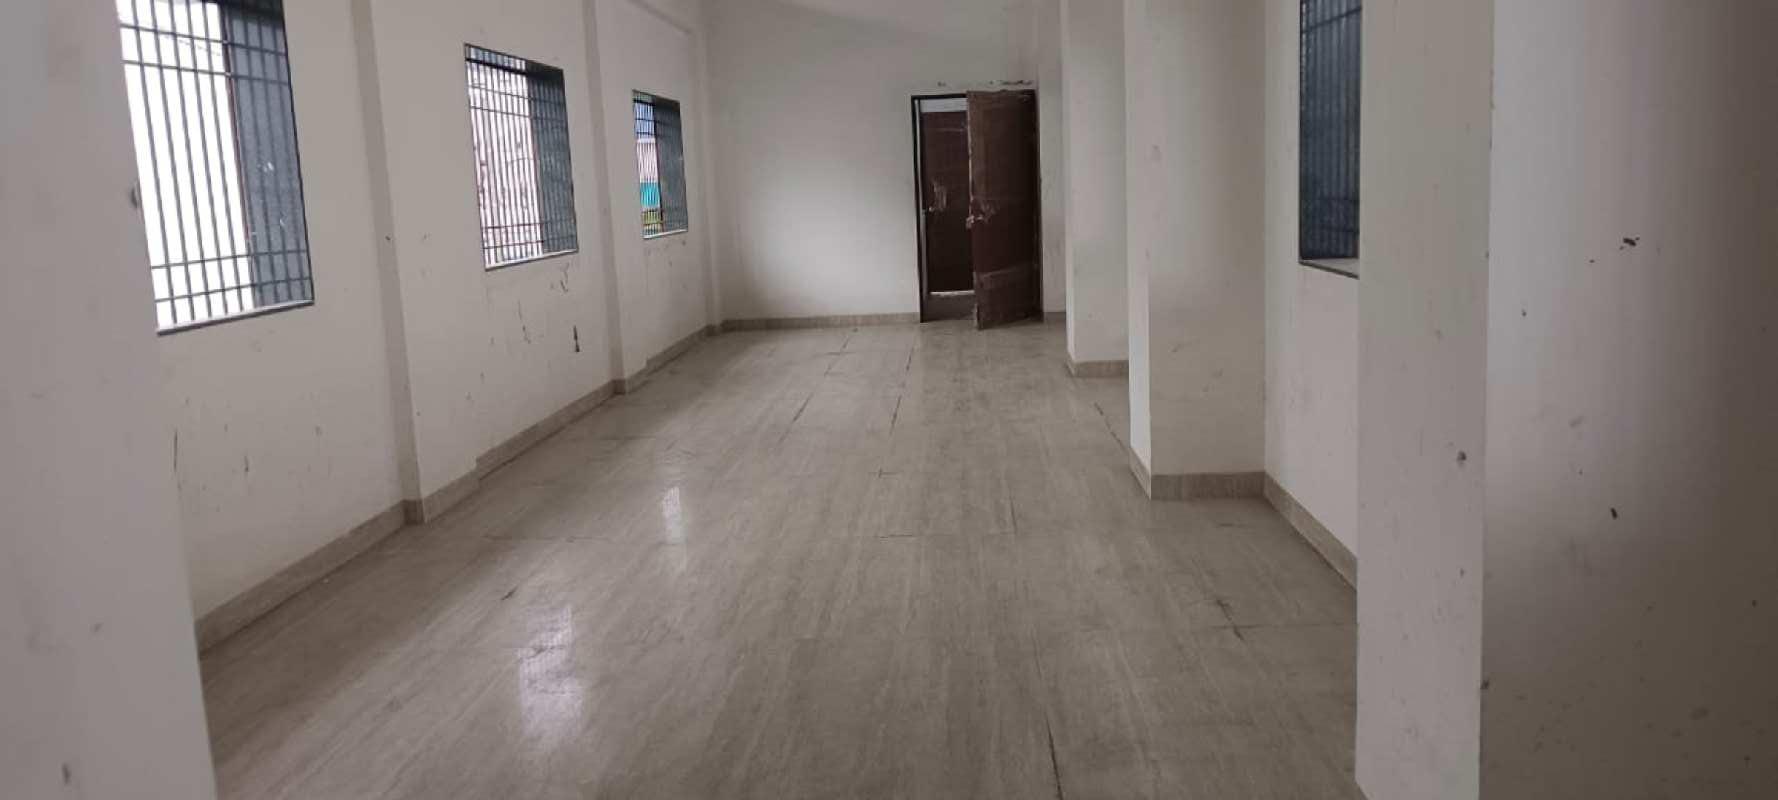 24270 Sq.ft. Factory / Industrial Building for Rent in Chakan MIDC, Pune